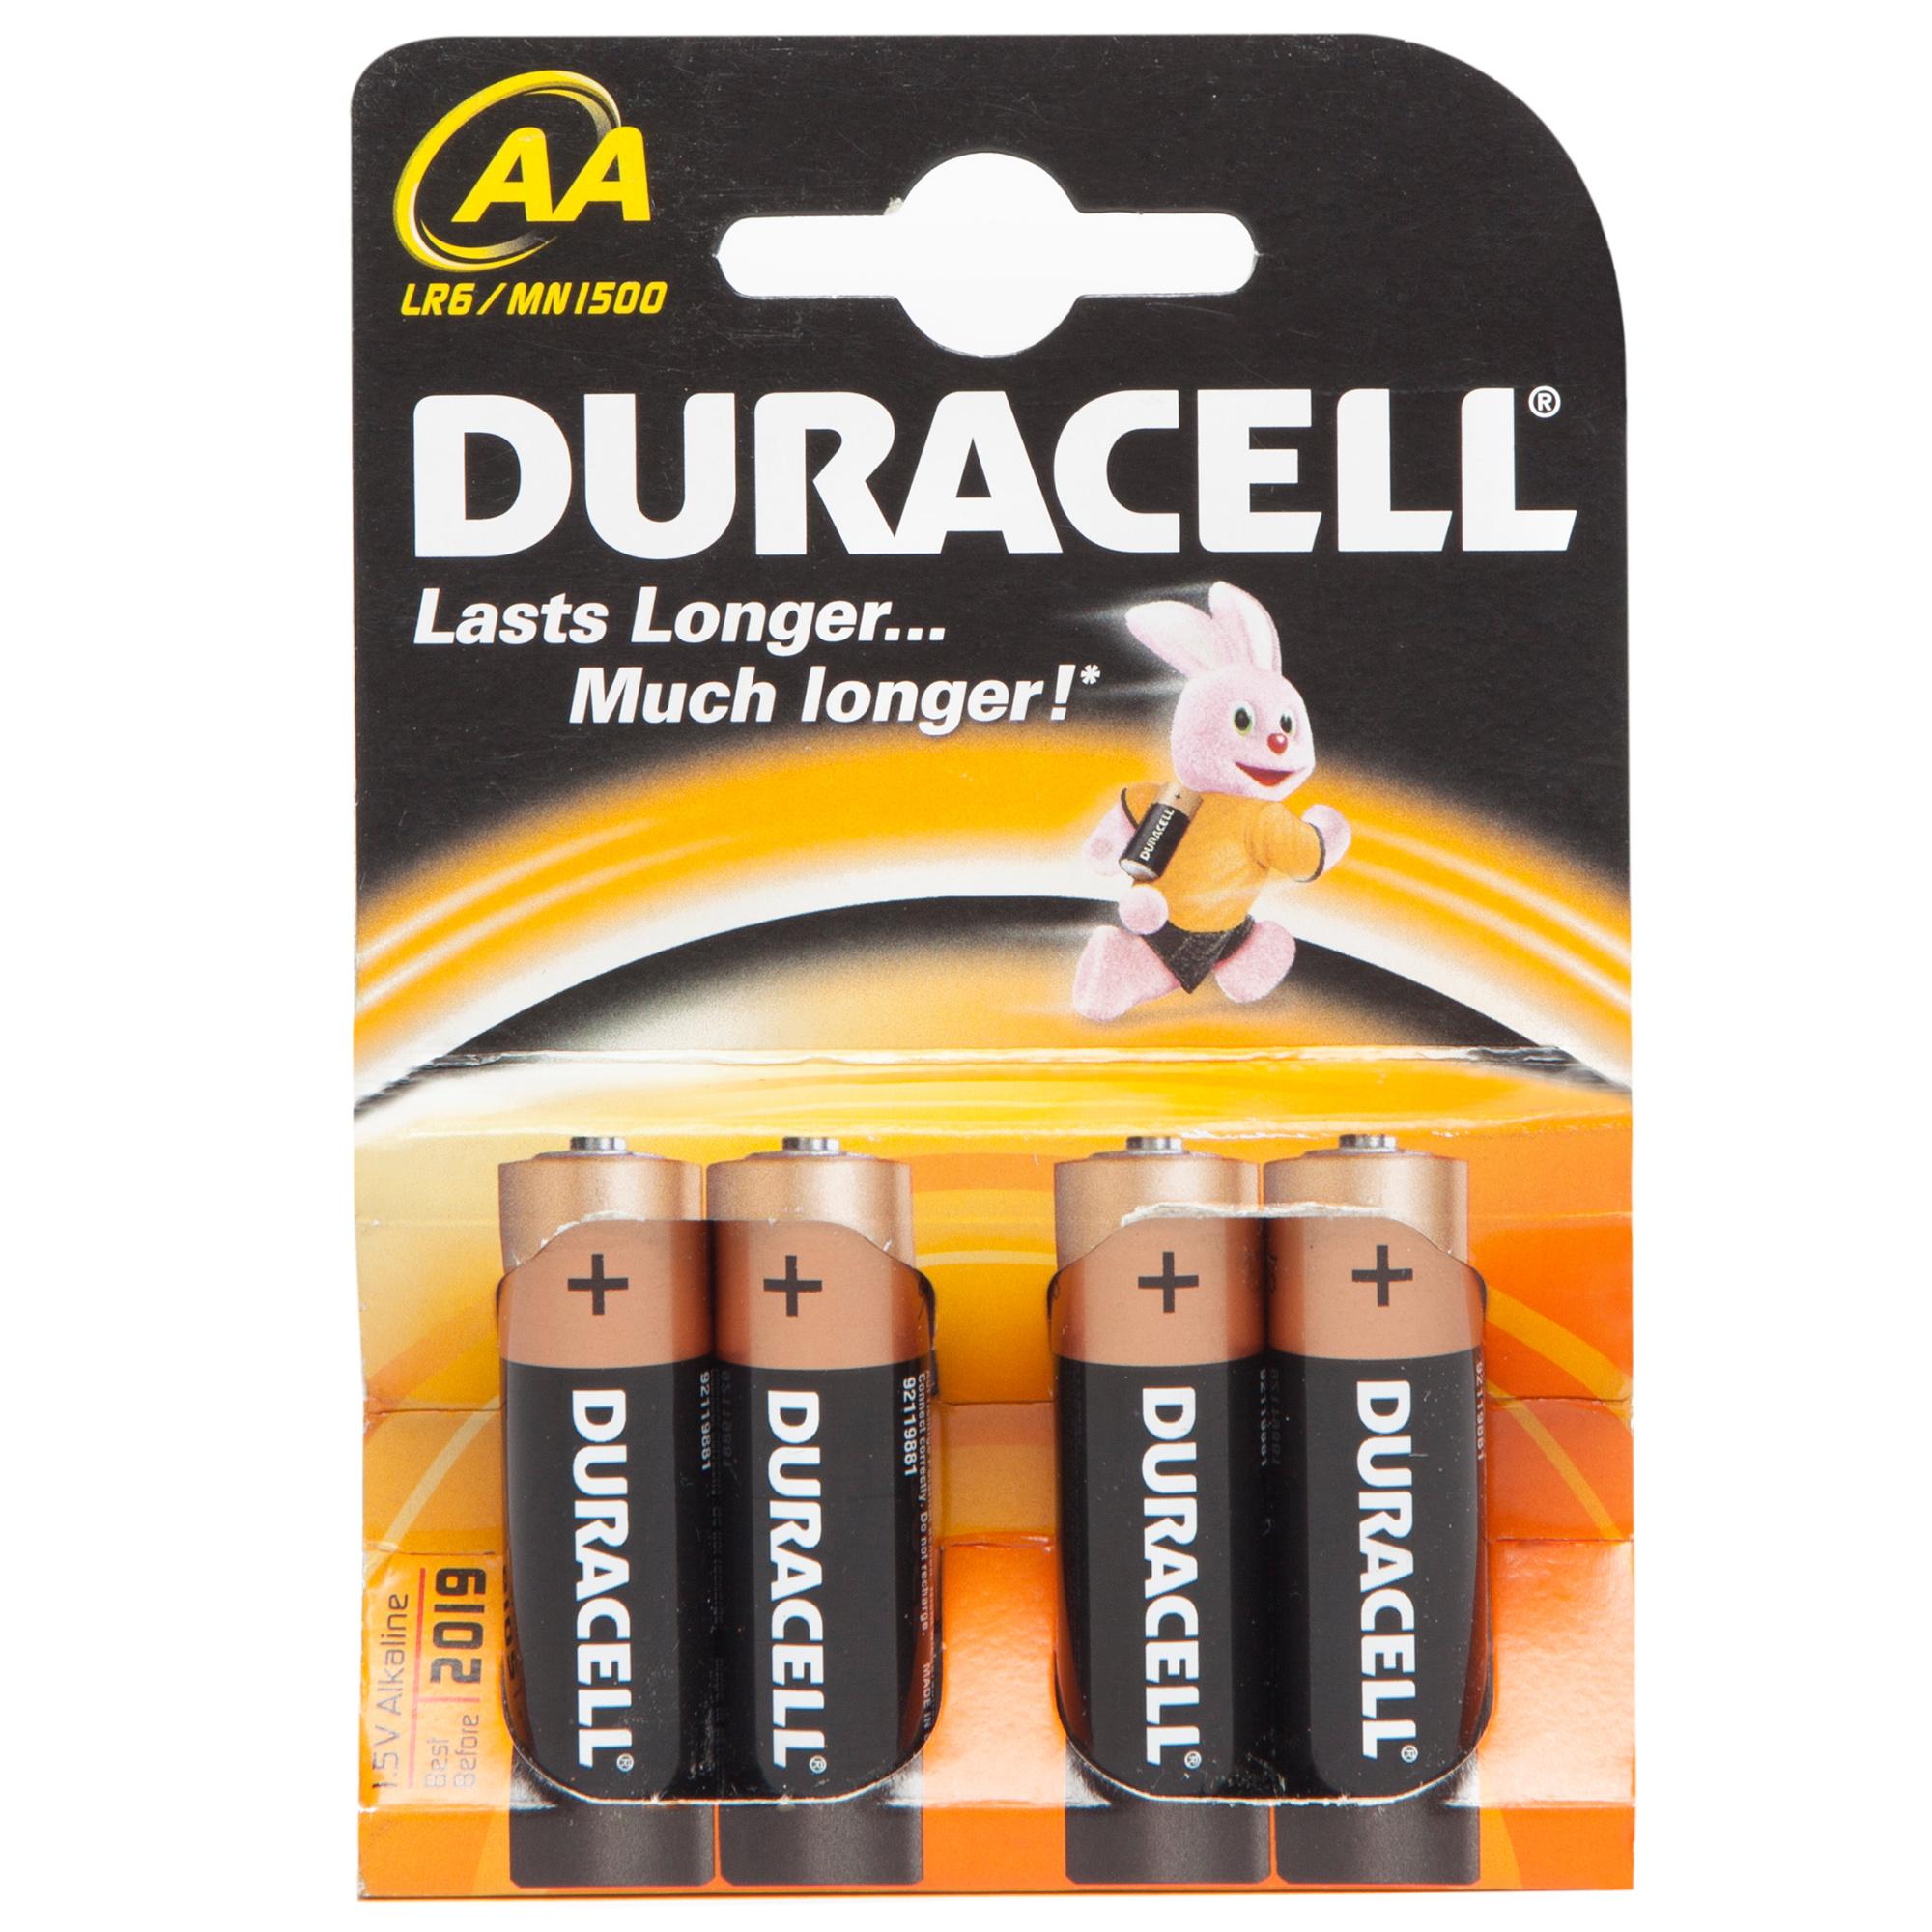 Duracell Plus Power Aa Batteries - 4 Pack